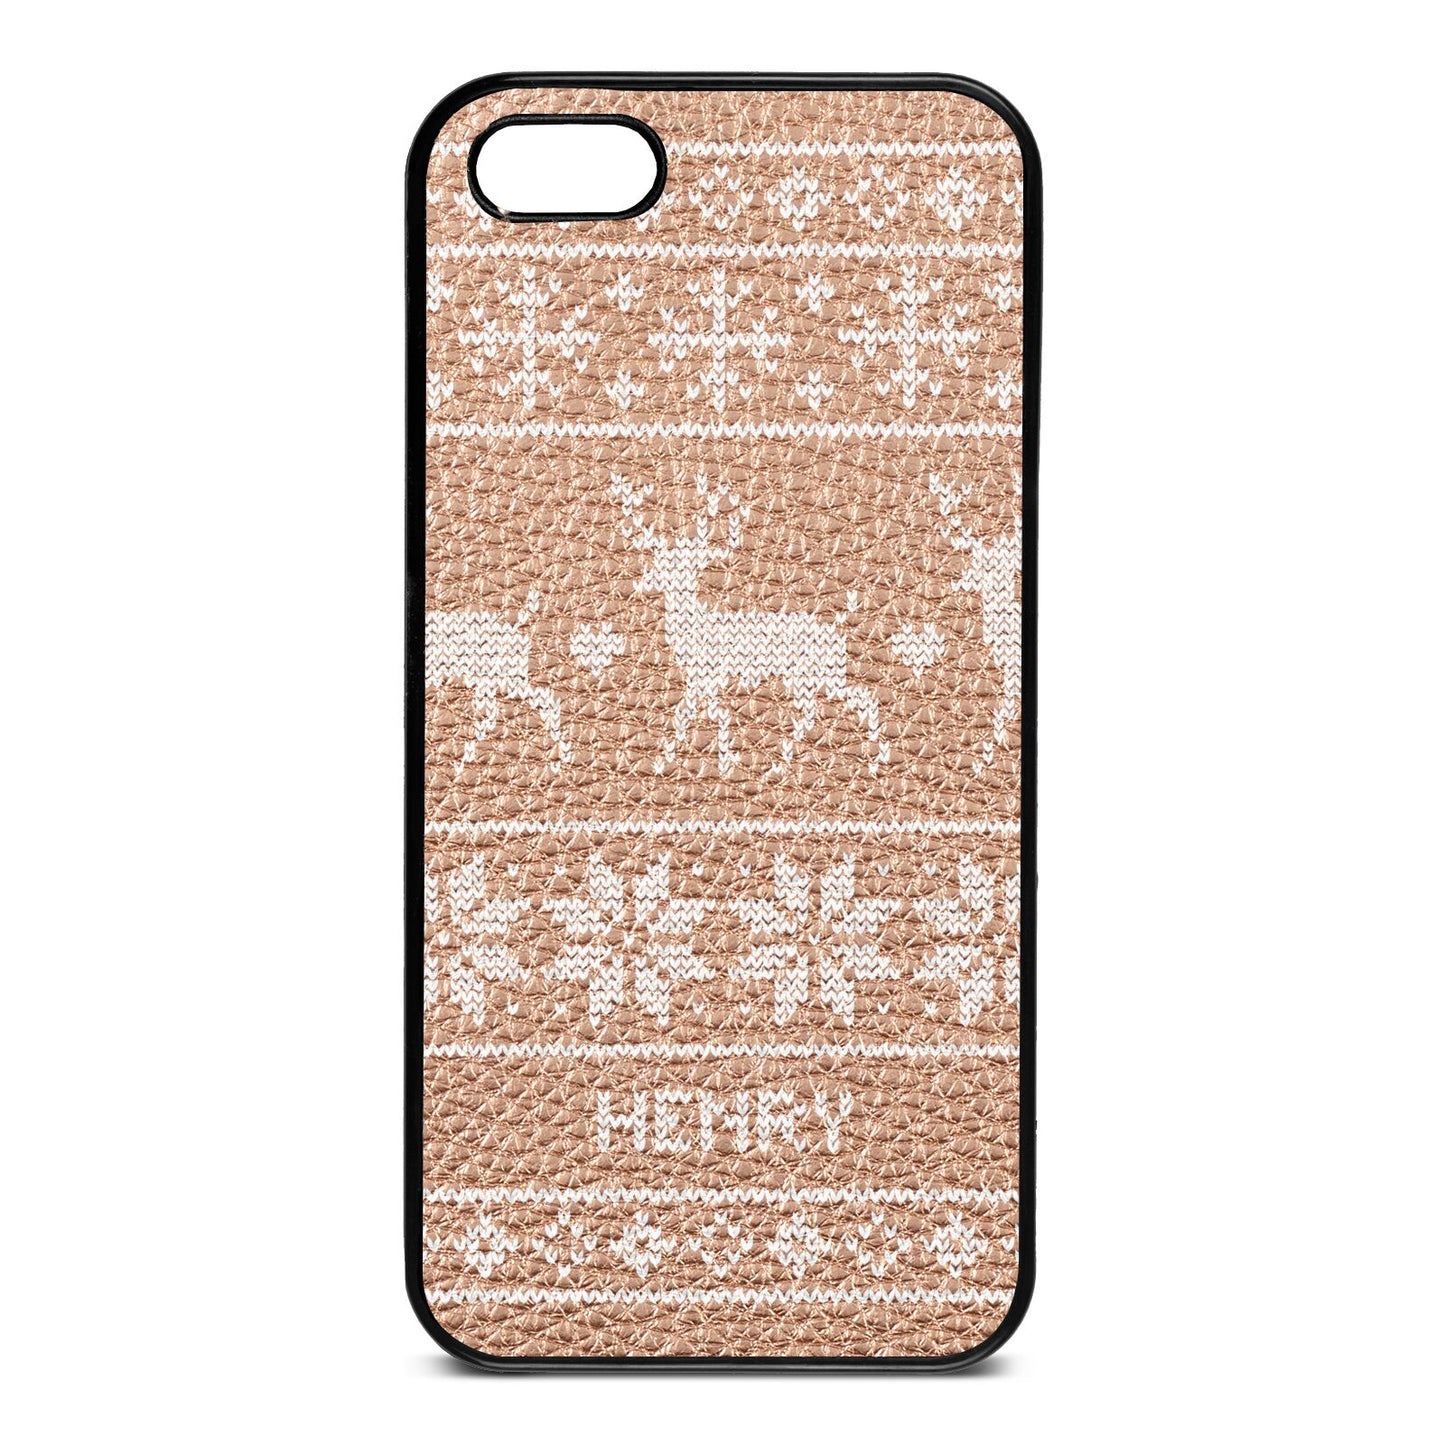 Personalised Christmas Jumper Rose Gold Pebble Leather iPhone 5 Case